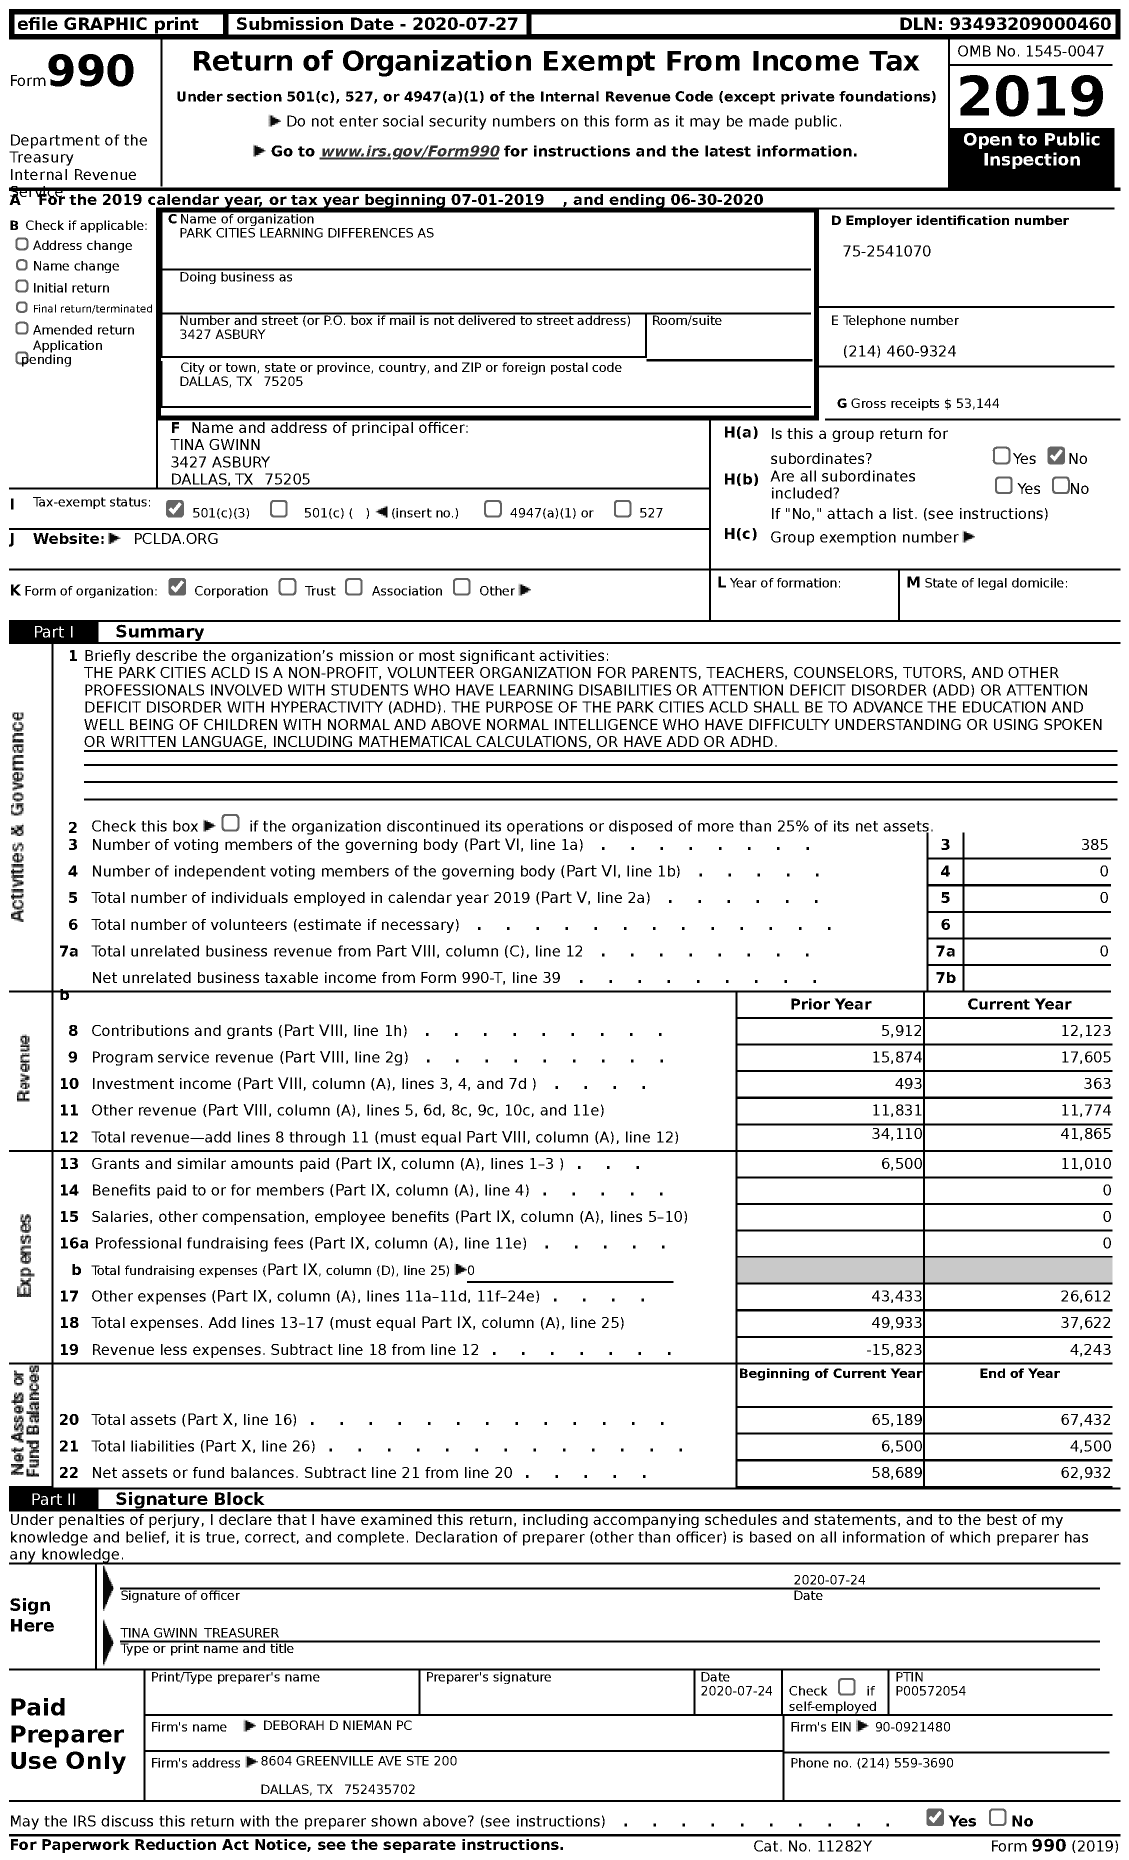 Image of first page of 2019 Form 990 for Park Cities Learning Differences As